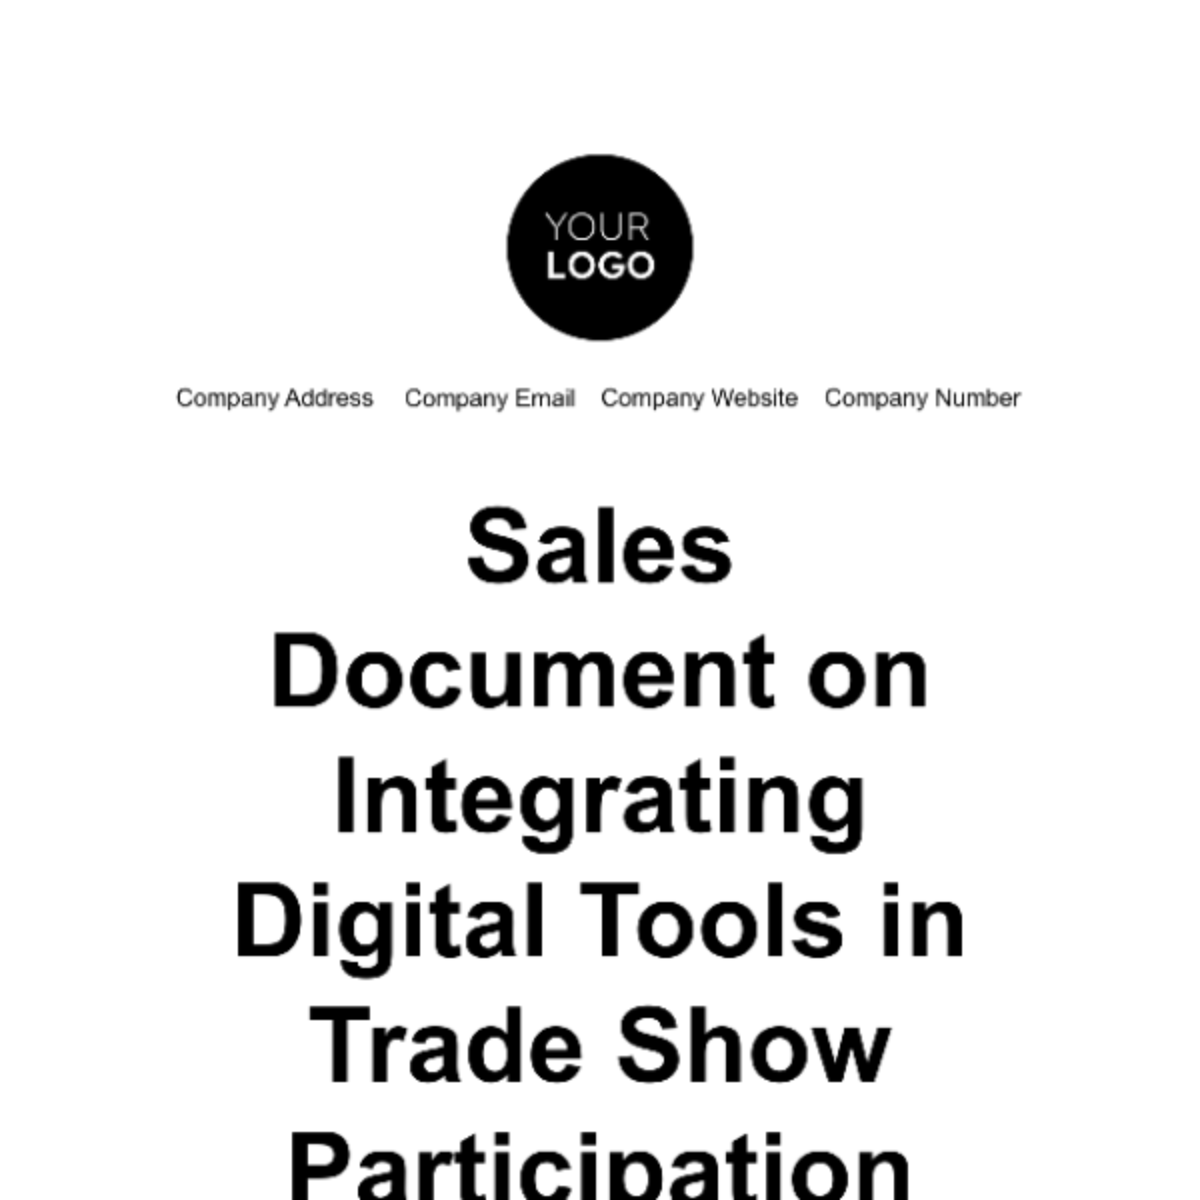 Free Sales Document on Integrating Digital Tools in Trade Show Participation Template